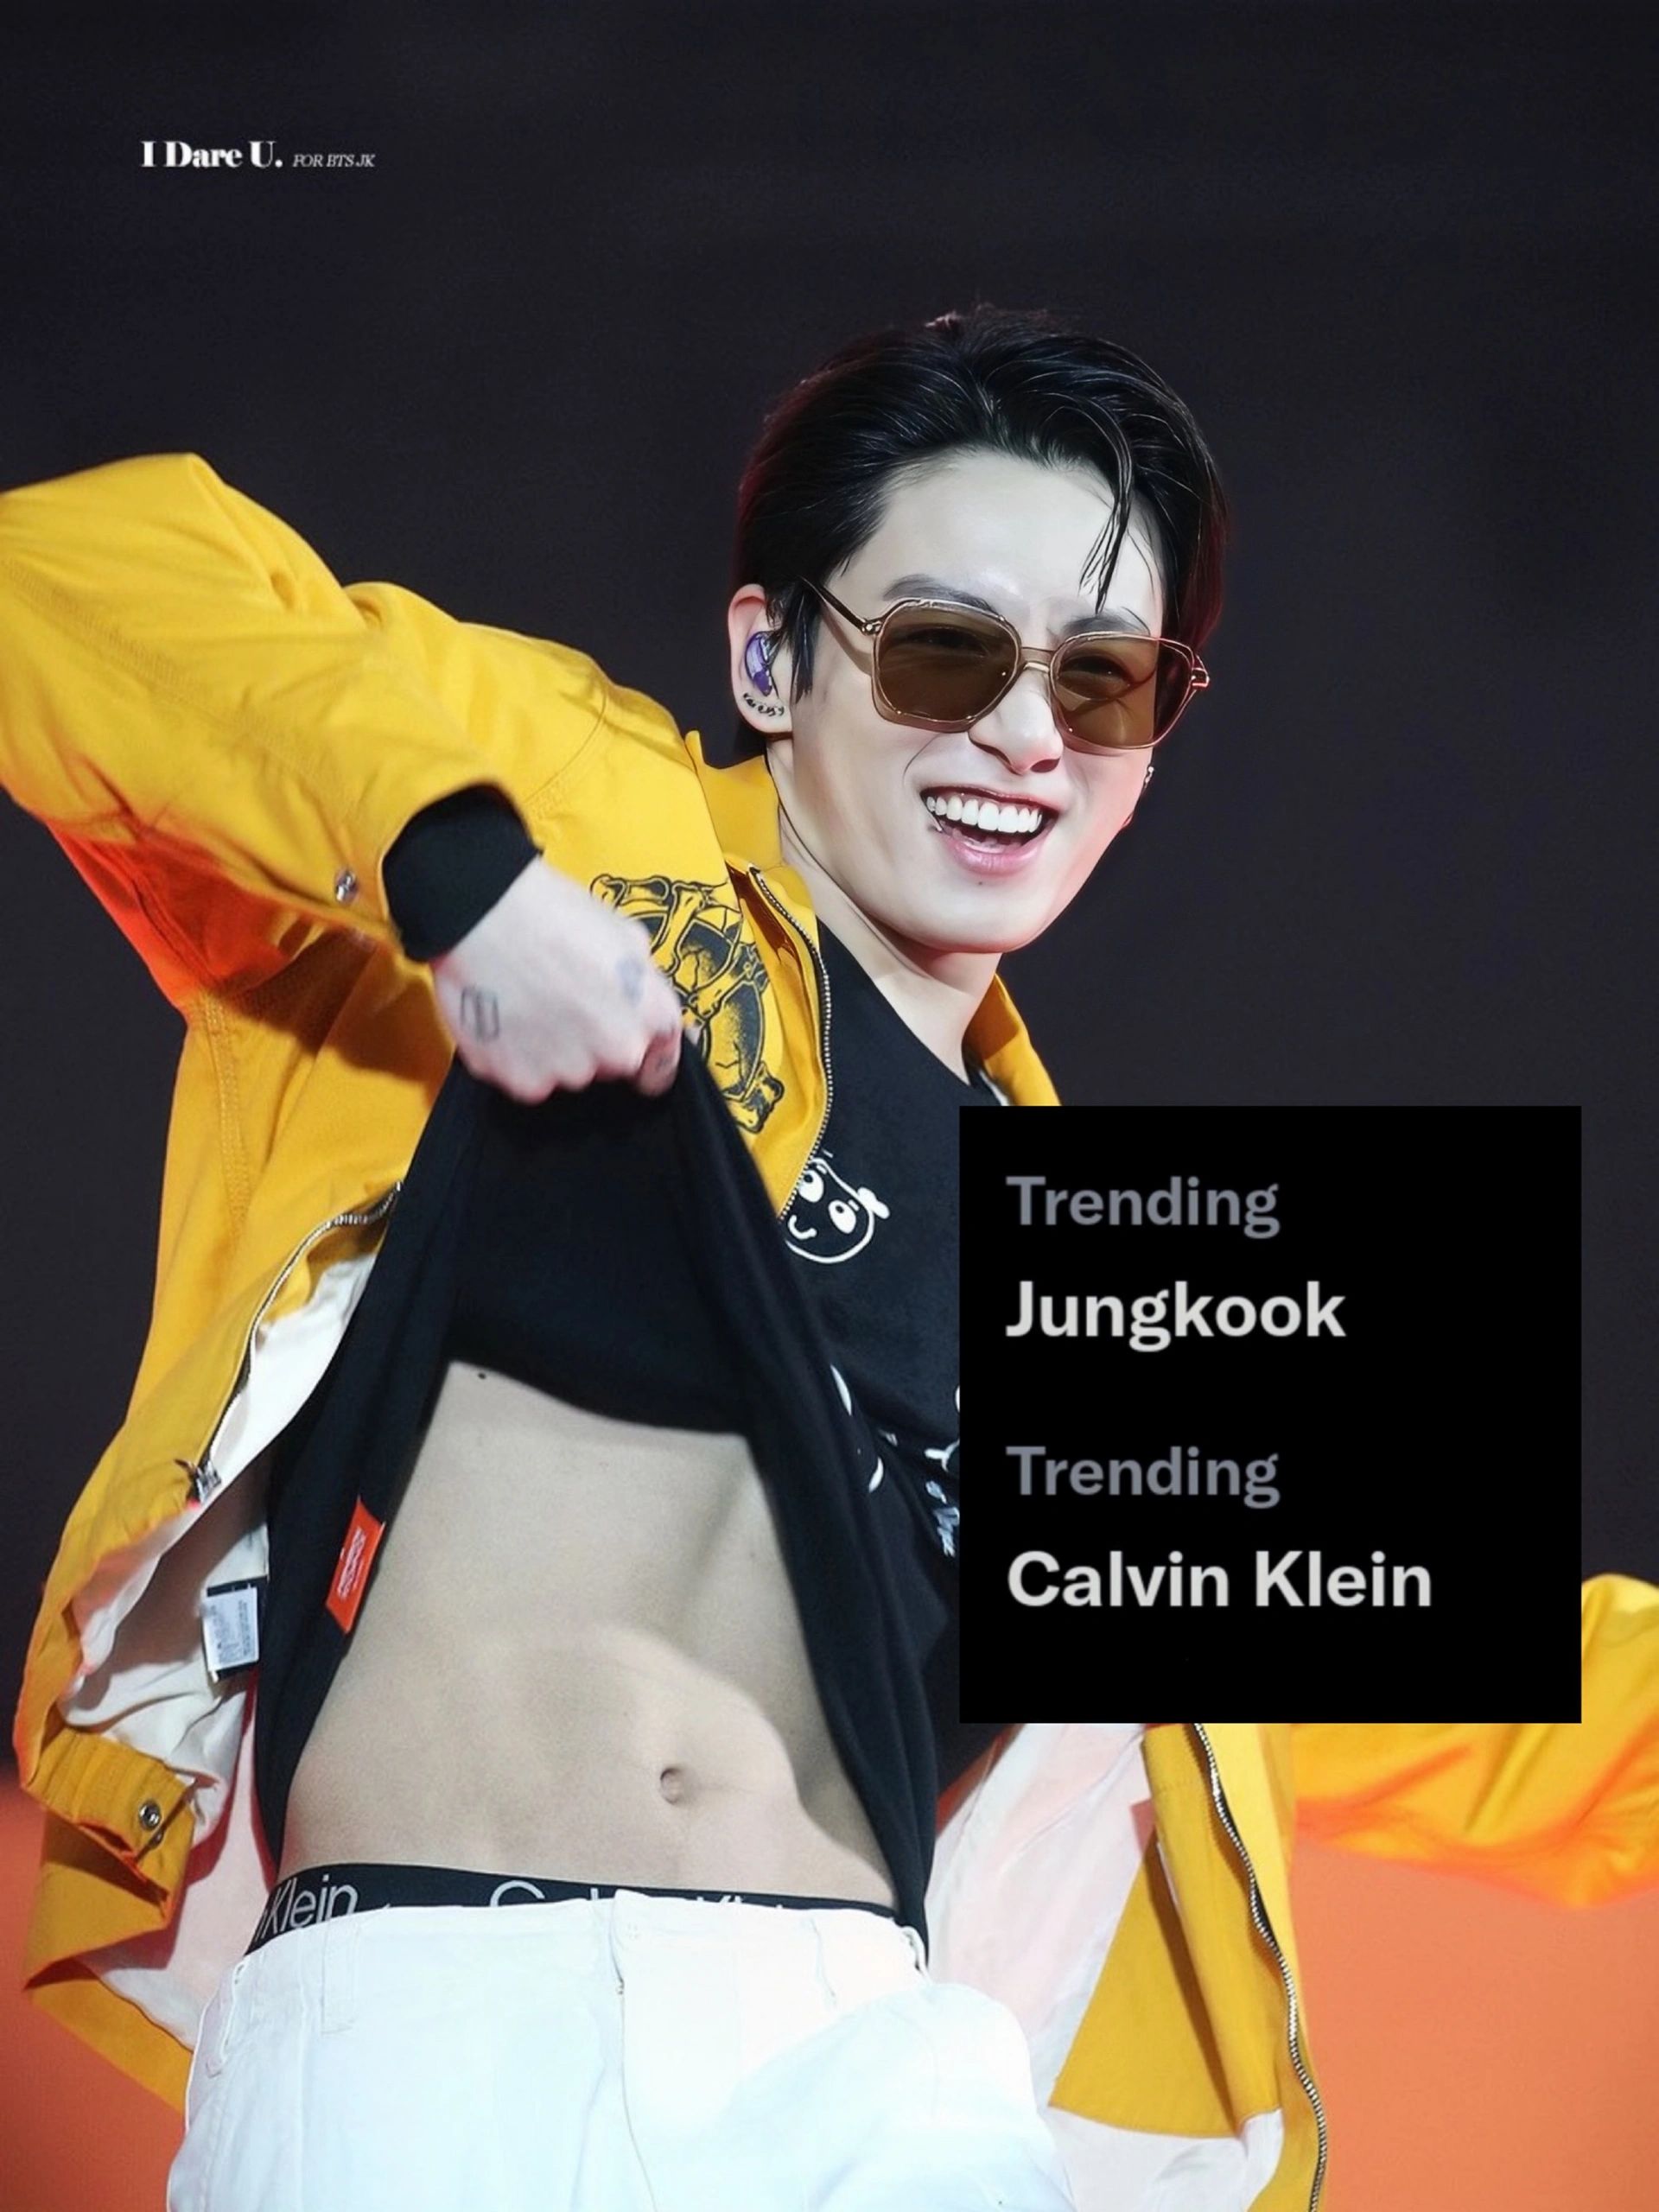 Jungkook: Number One Rising Topic Under Calvin Klein on Google